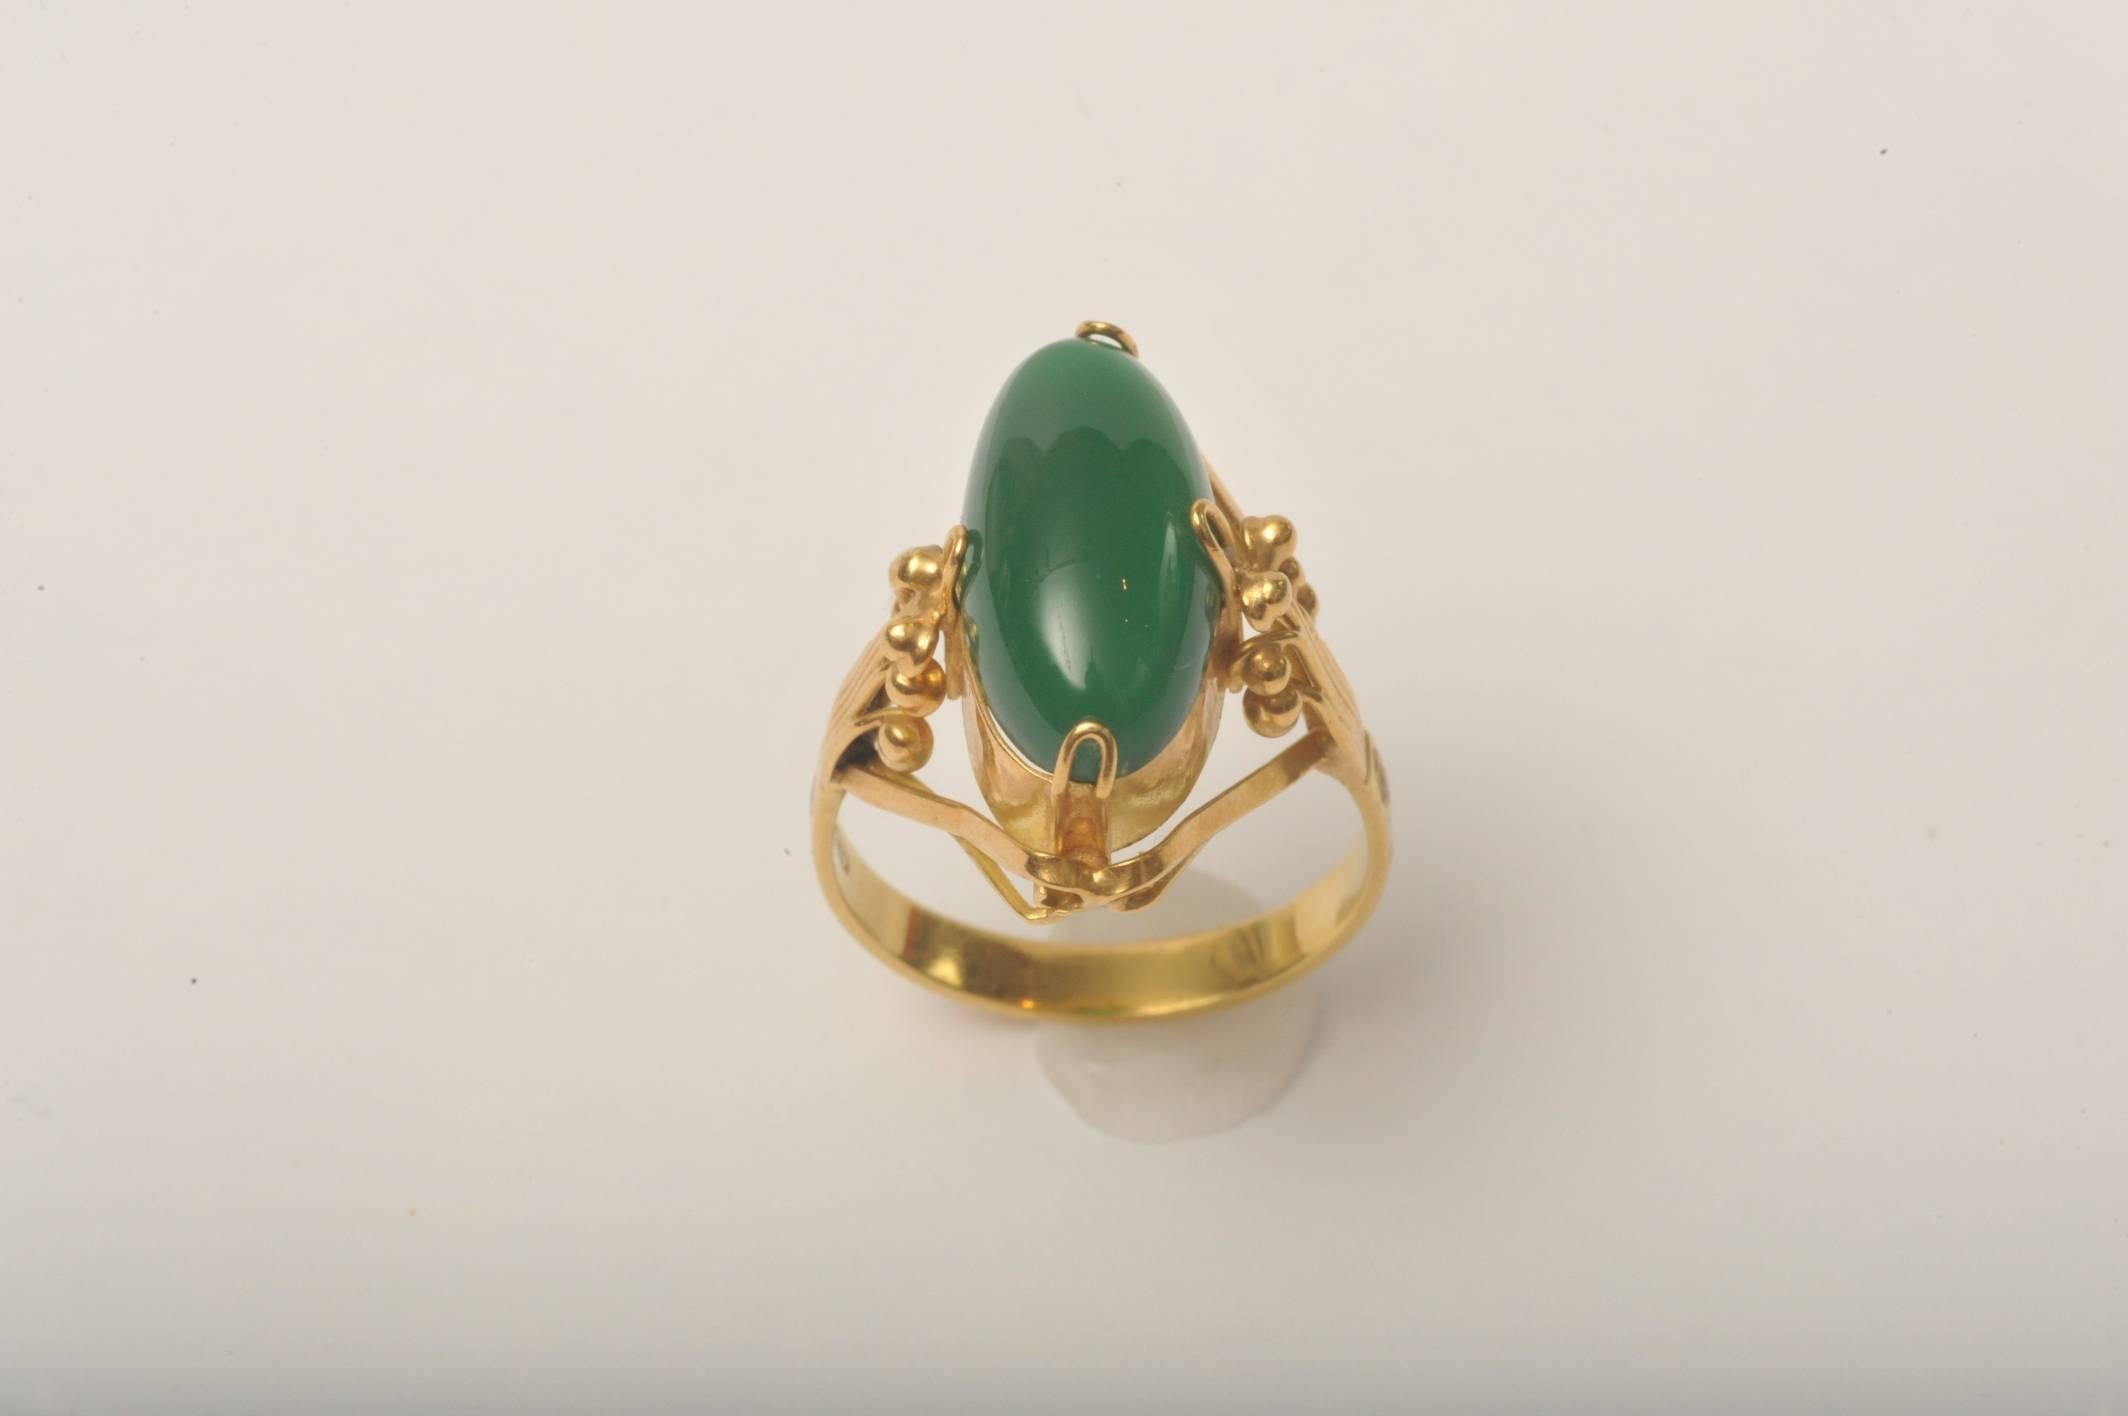 Stunning deco period ring of 18K gold and oval cabochon green chalcedony stone.  Fine workmanship and detailing.  Size is 9.25.  